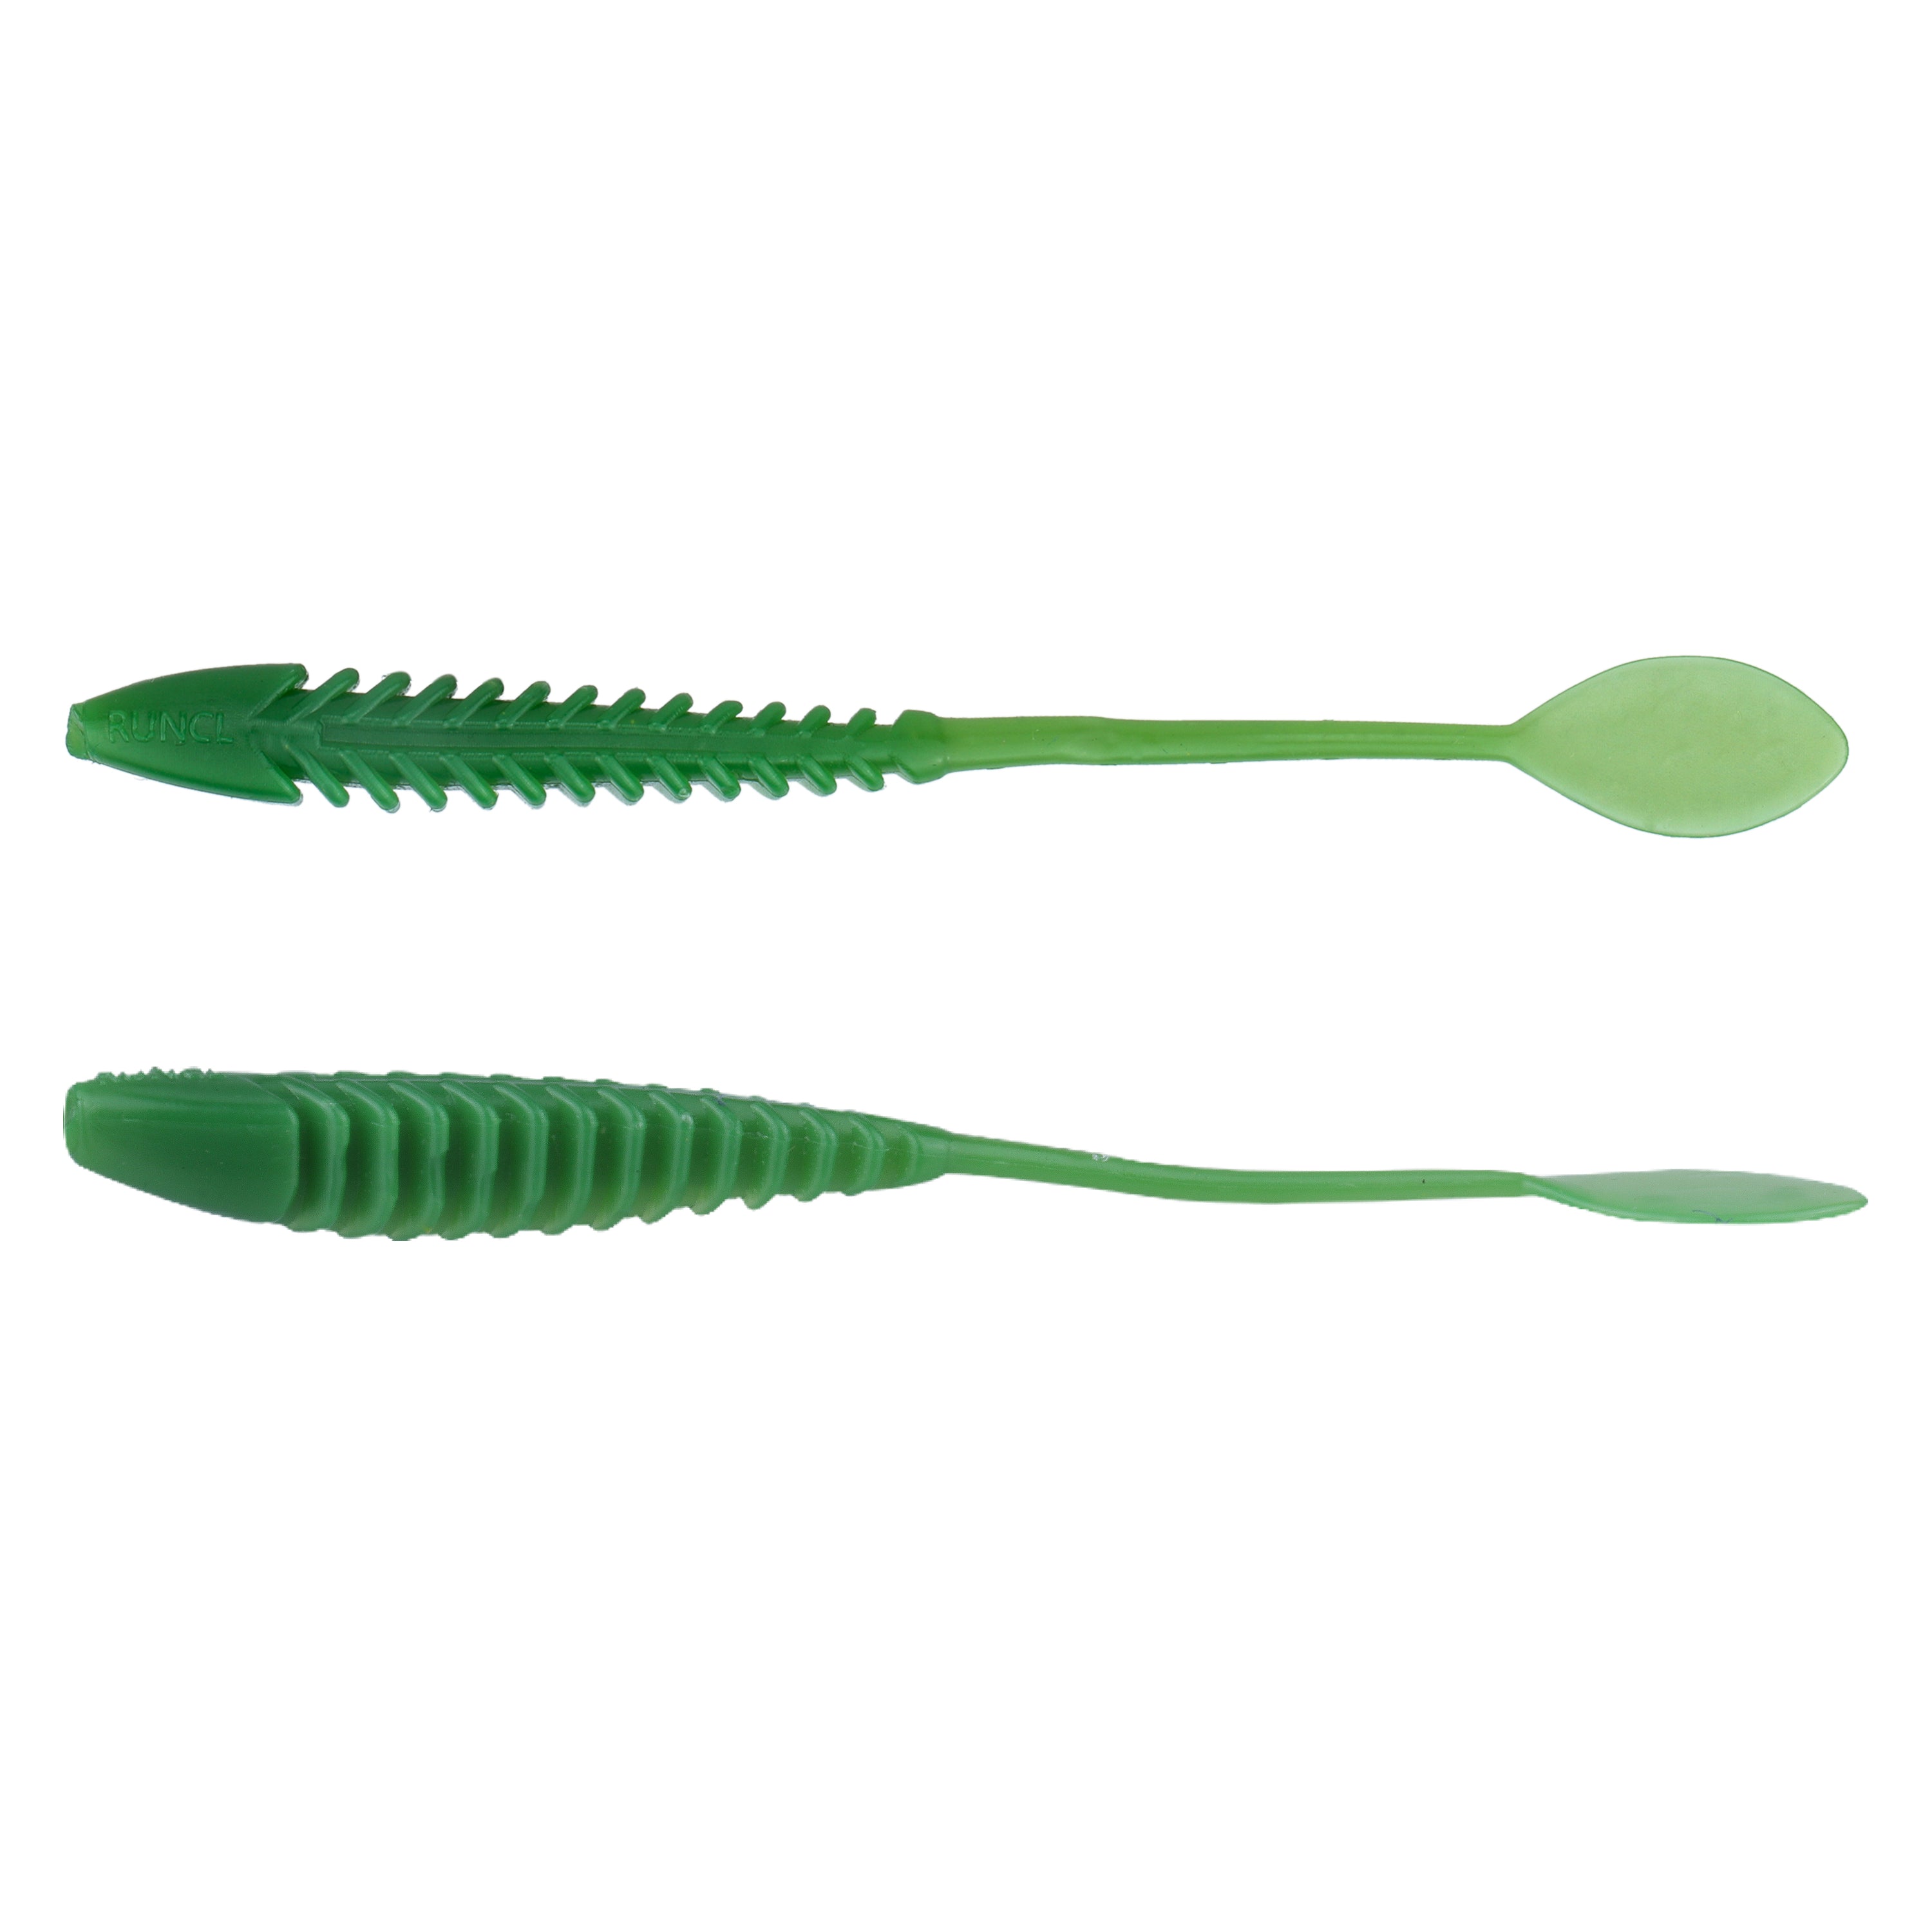 【$0.99】RUNCL ProBite Willow Leaf Tail Swimbaits